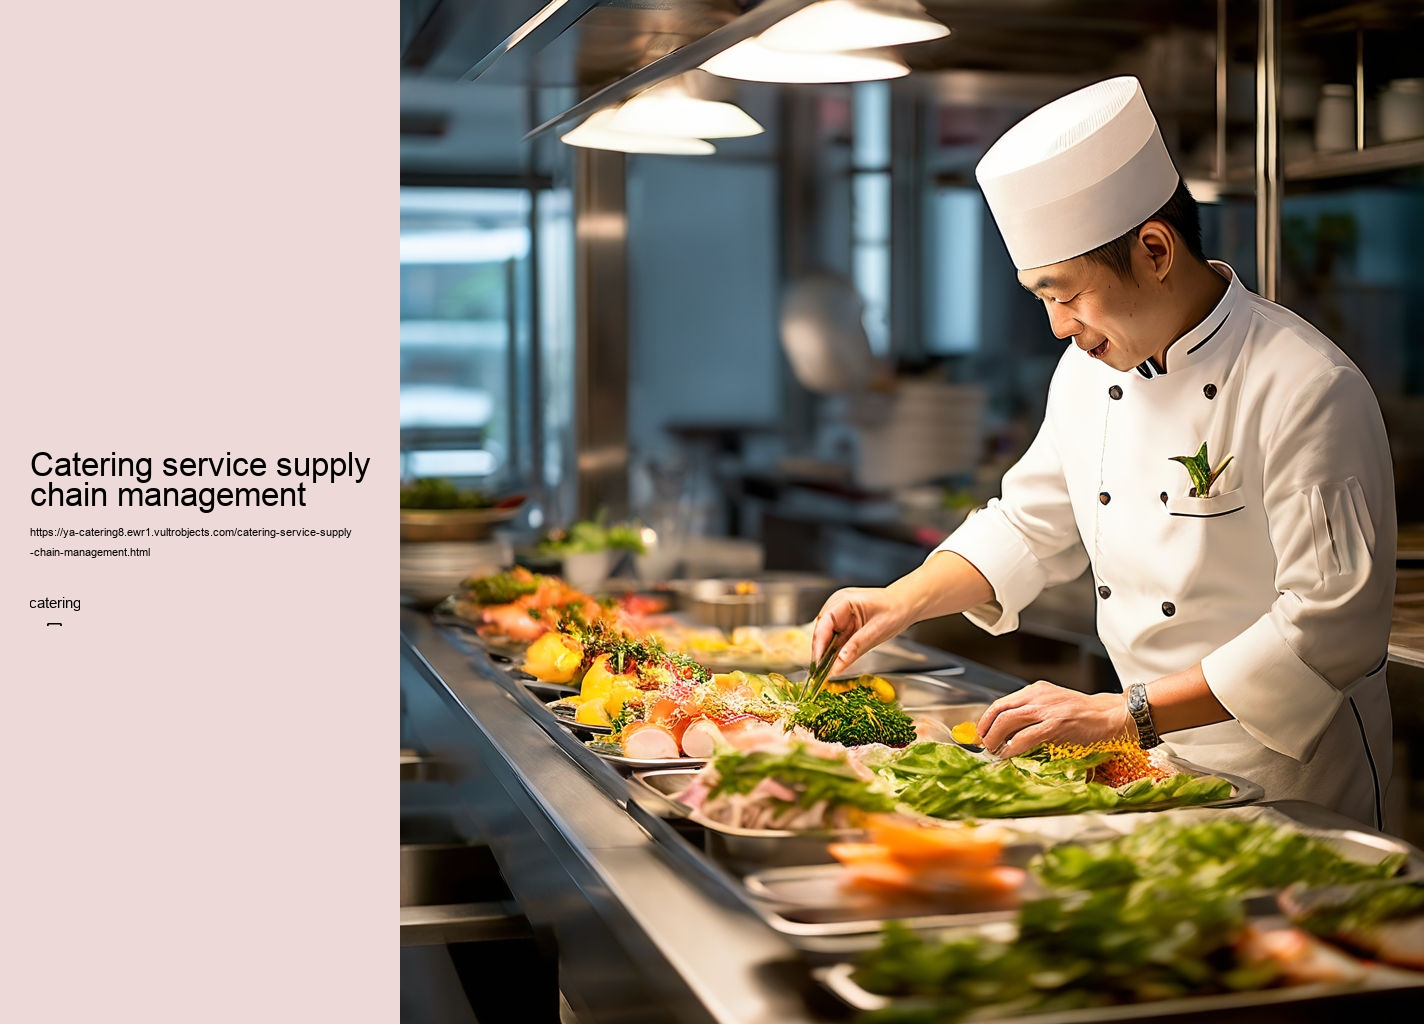 Catering service supply chain management